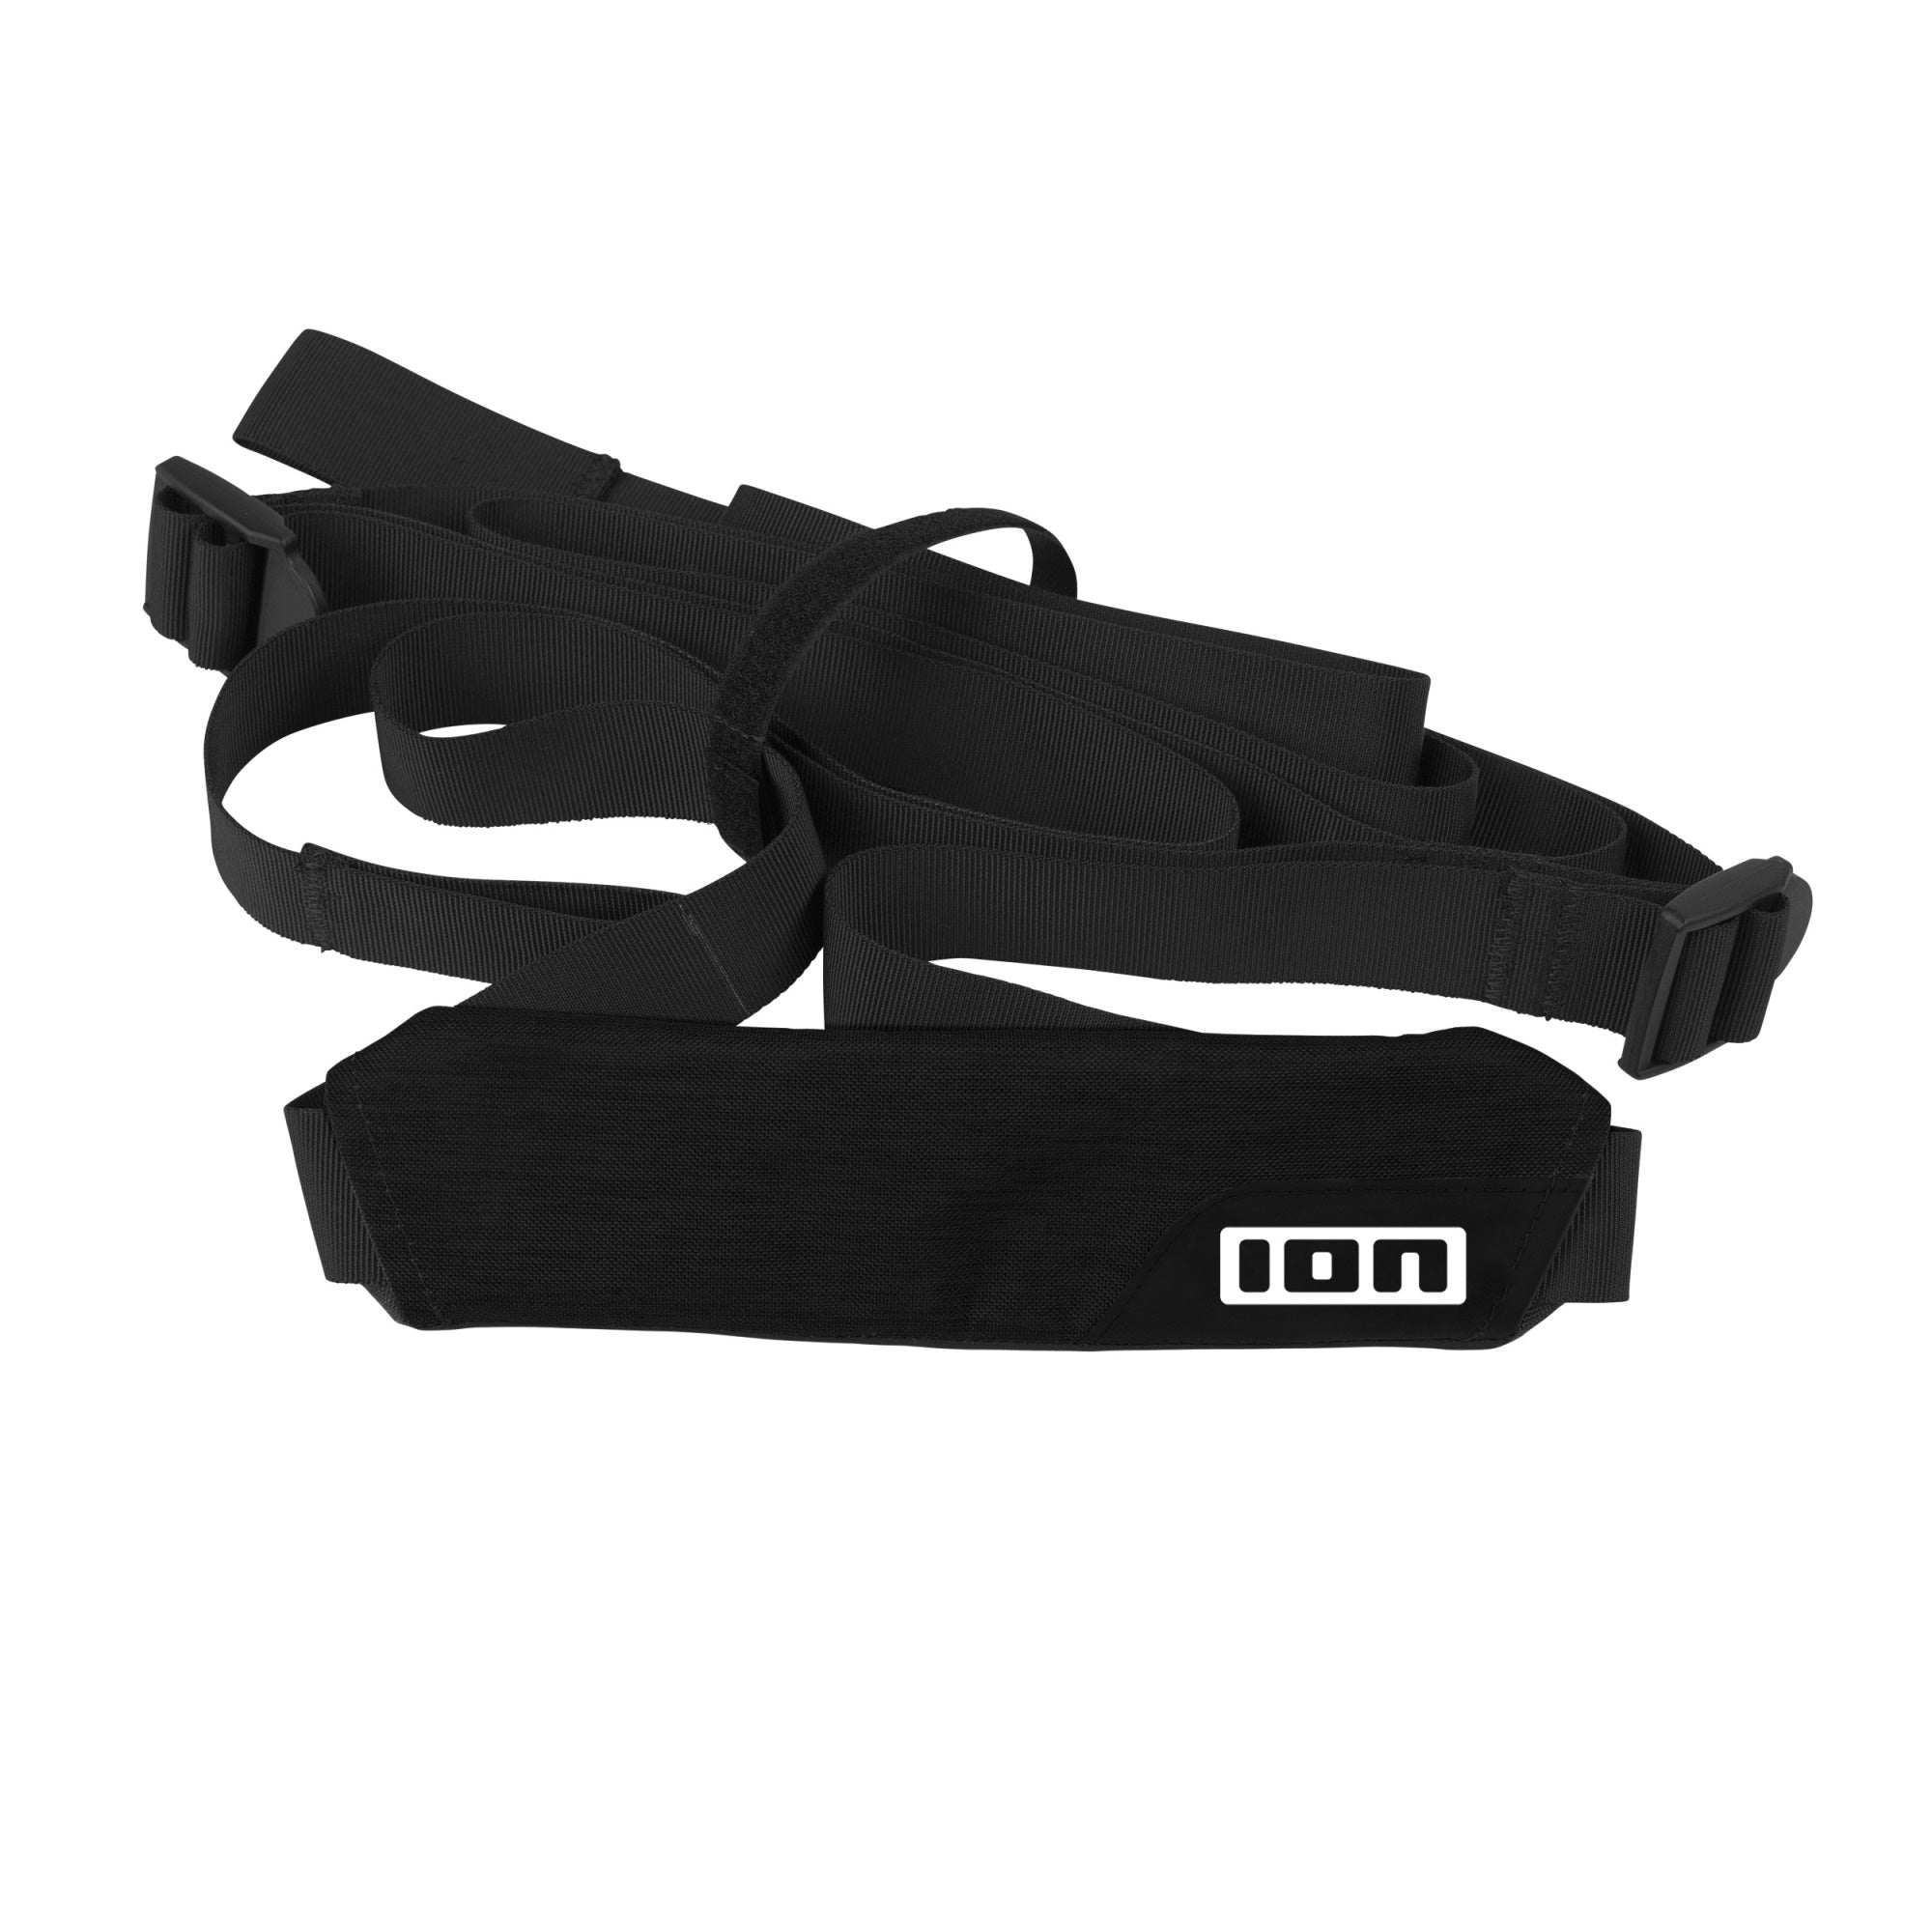 Paddleboard Carry Belt - Worthing Watersports - 4821-7072 - Accessories - ION Water